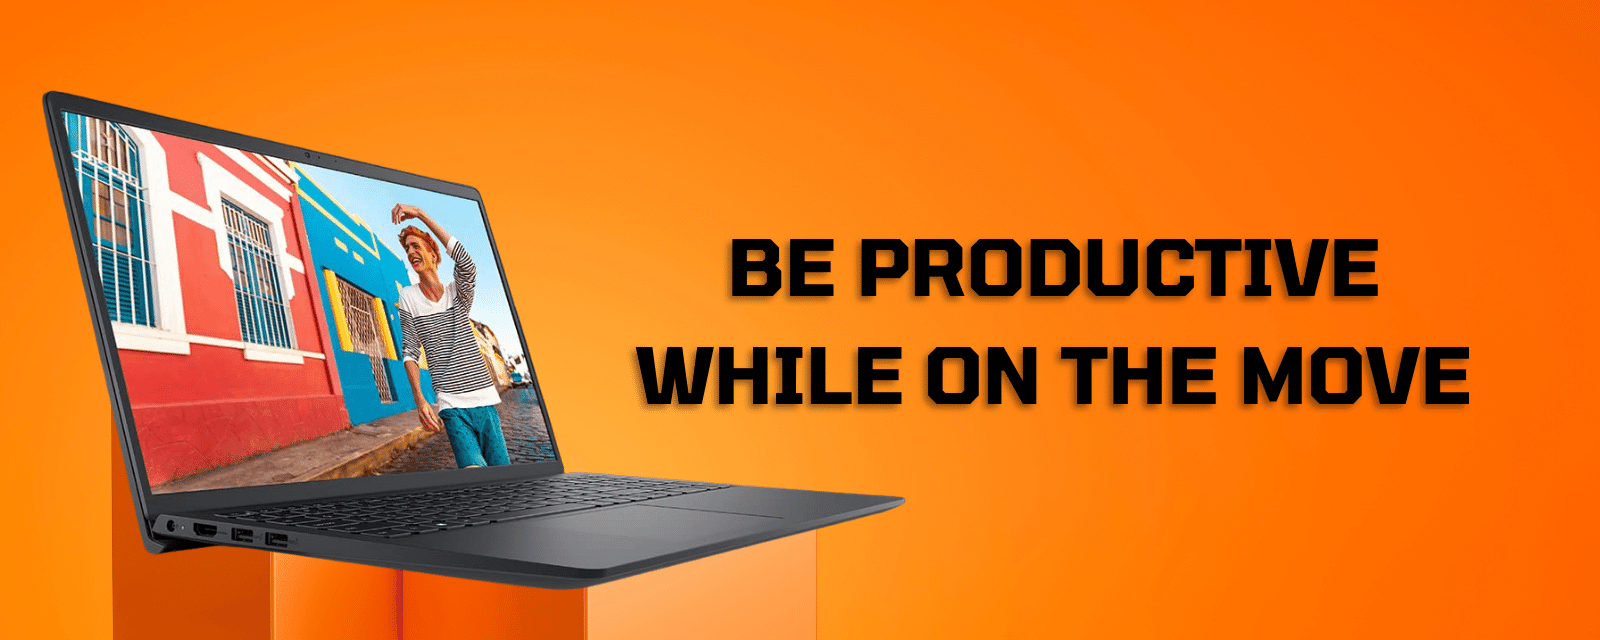 Custom Laptops Fulfil tasks, and get work done in a smooth plus efficient manner. Robust Laptops with brilliantly optimized software to get you to your goals. Play and work in your own comfort with style